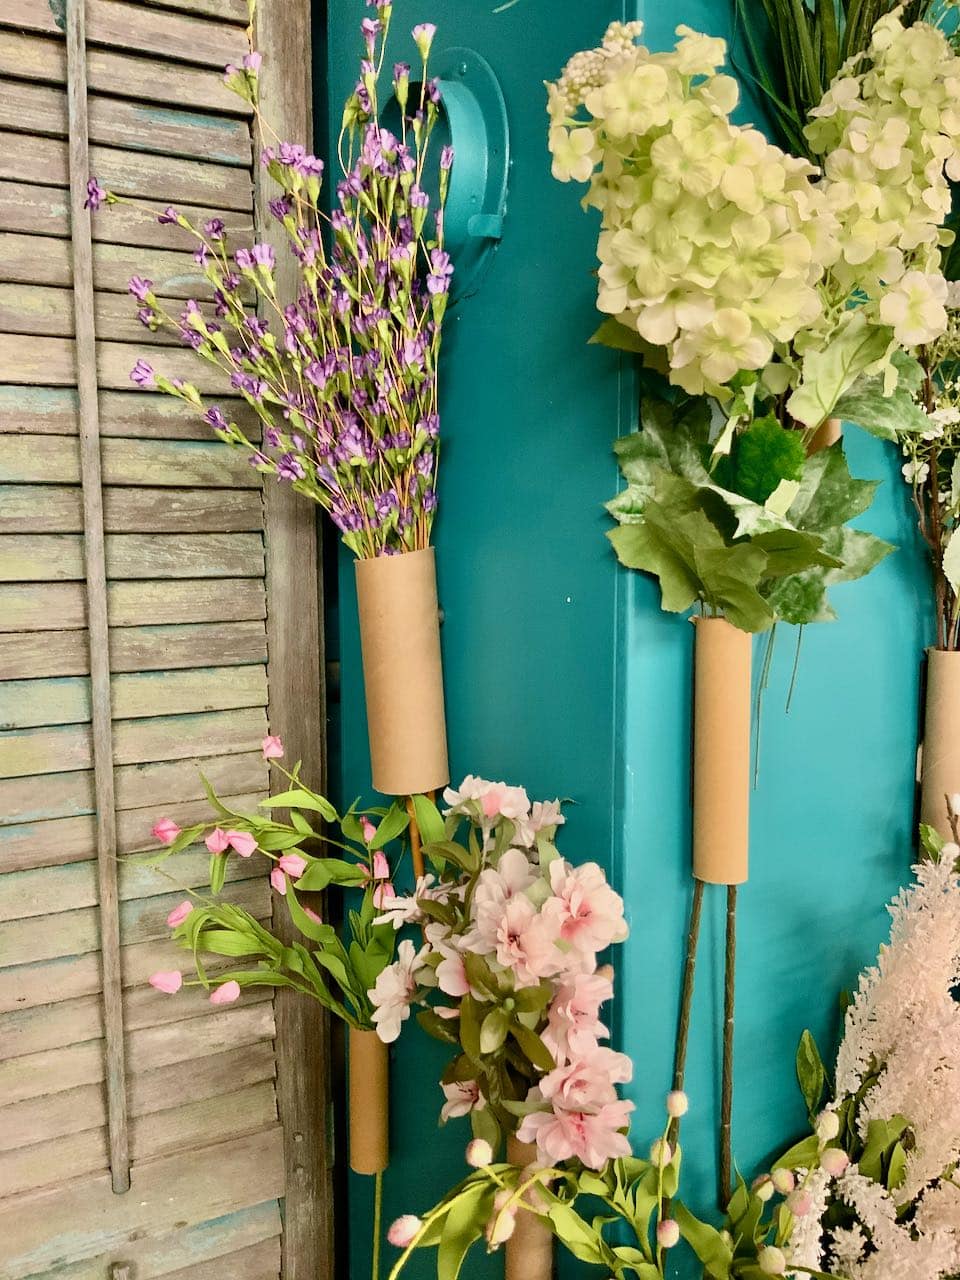 Best Storage Trick For Your Florals - South House Designs